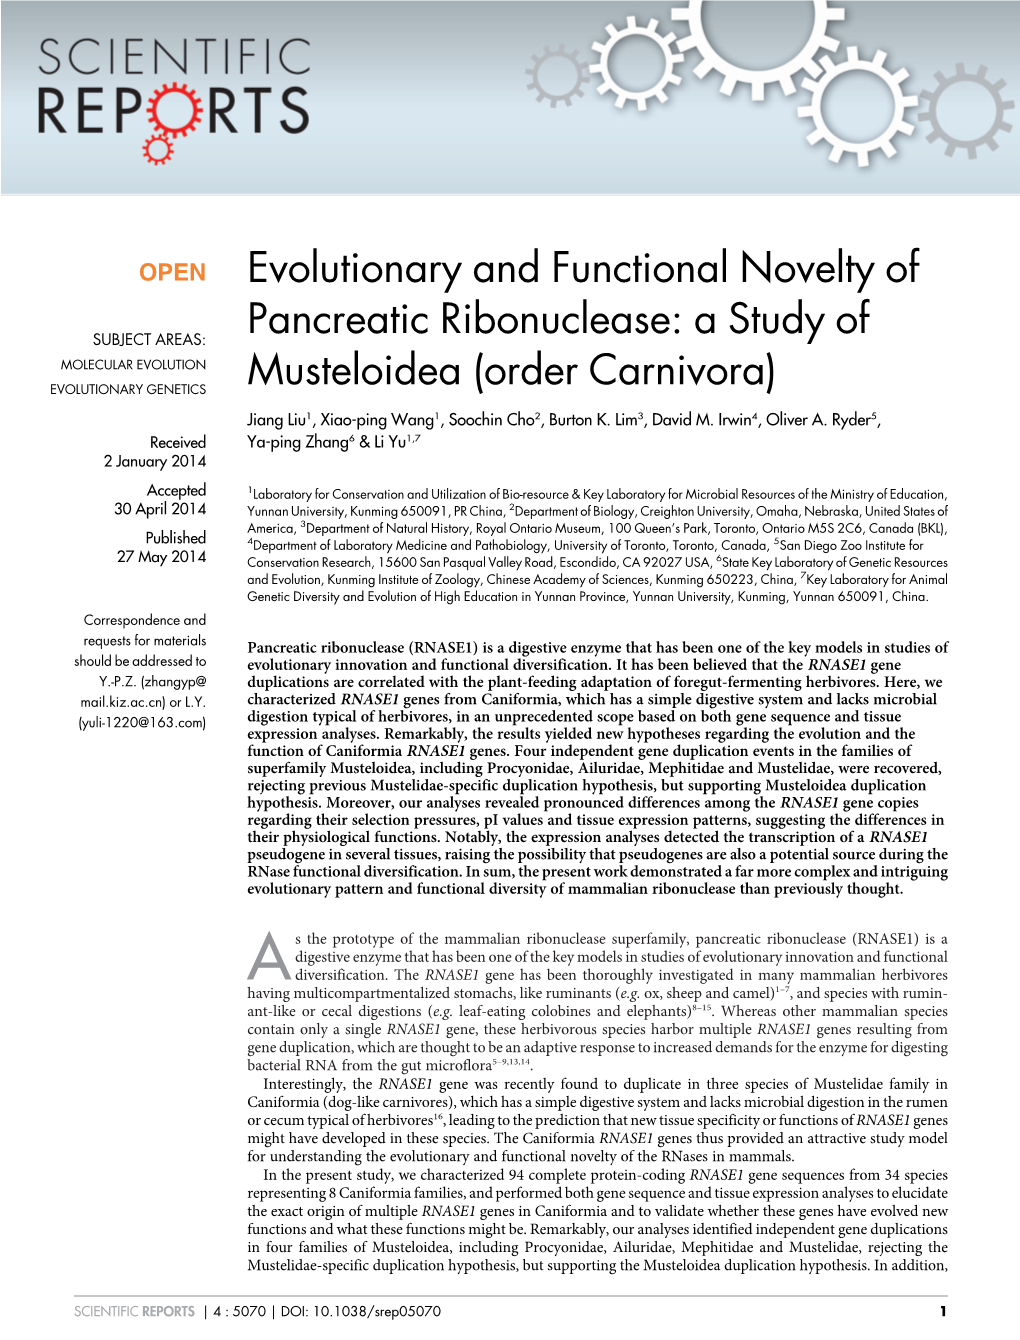 Evolutionary and Functional Novelty of Pancreatic Acknowledgments Ribonuclease: a Study of Musteloidea (Order Carnivora)